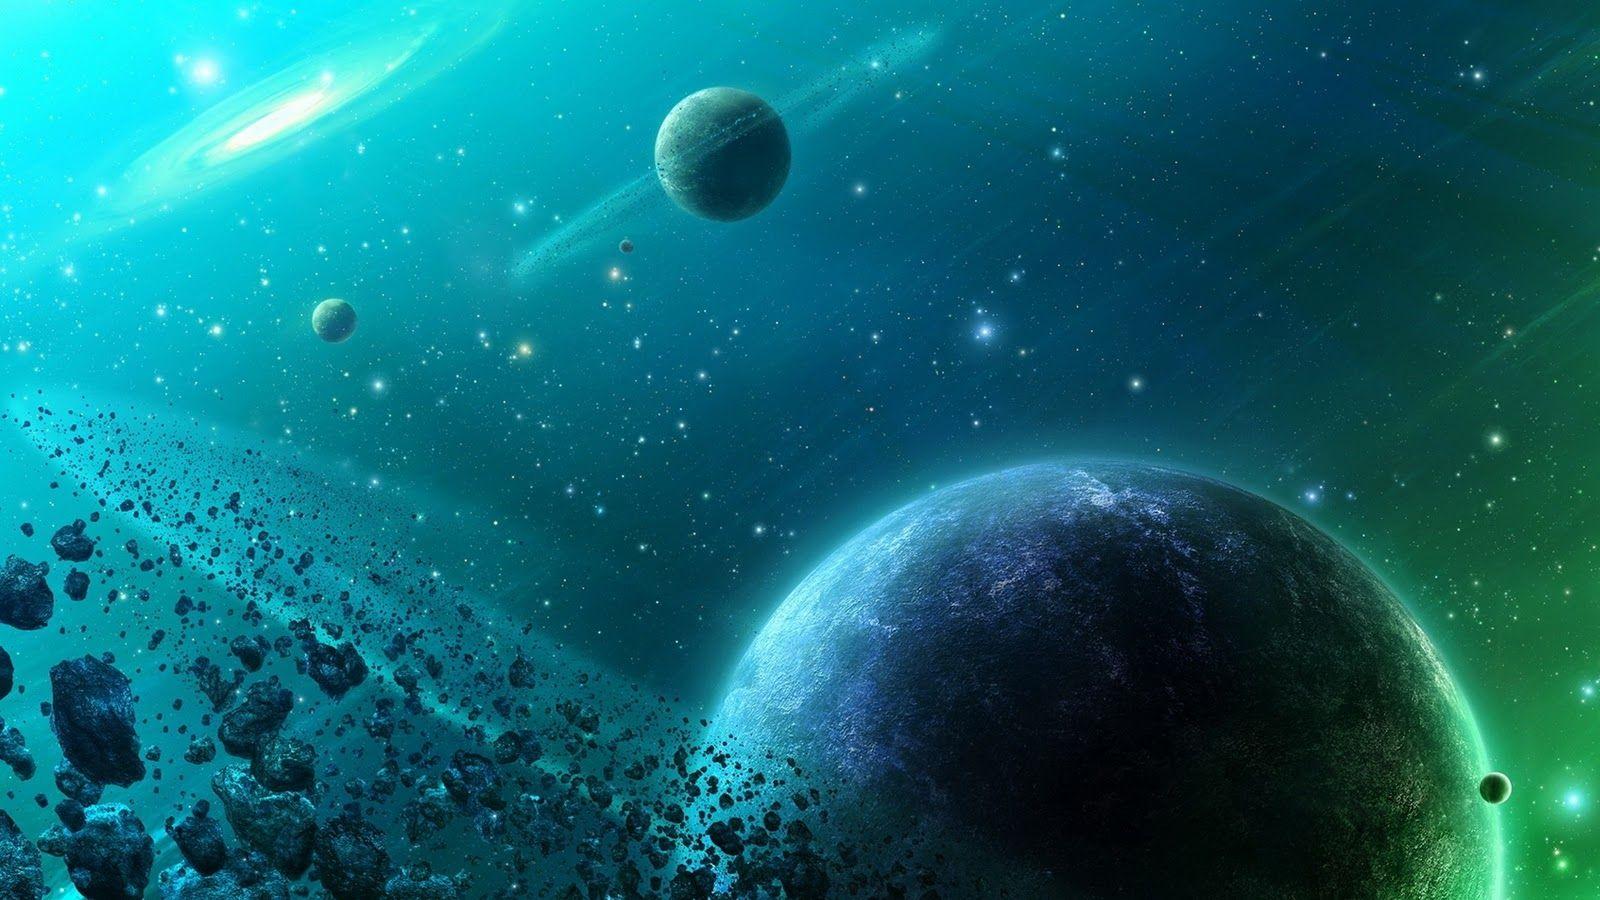 Space Lenovo Wallpapers